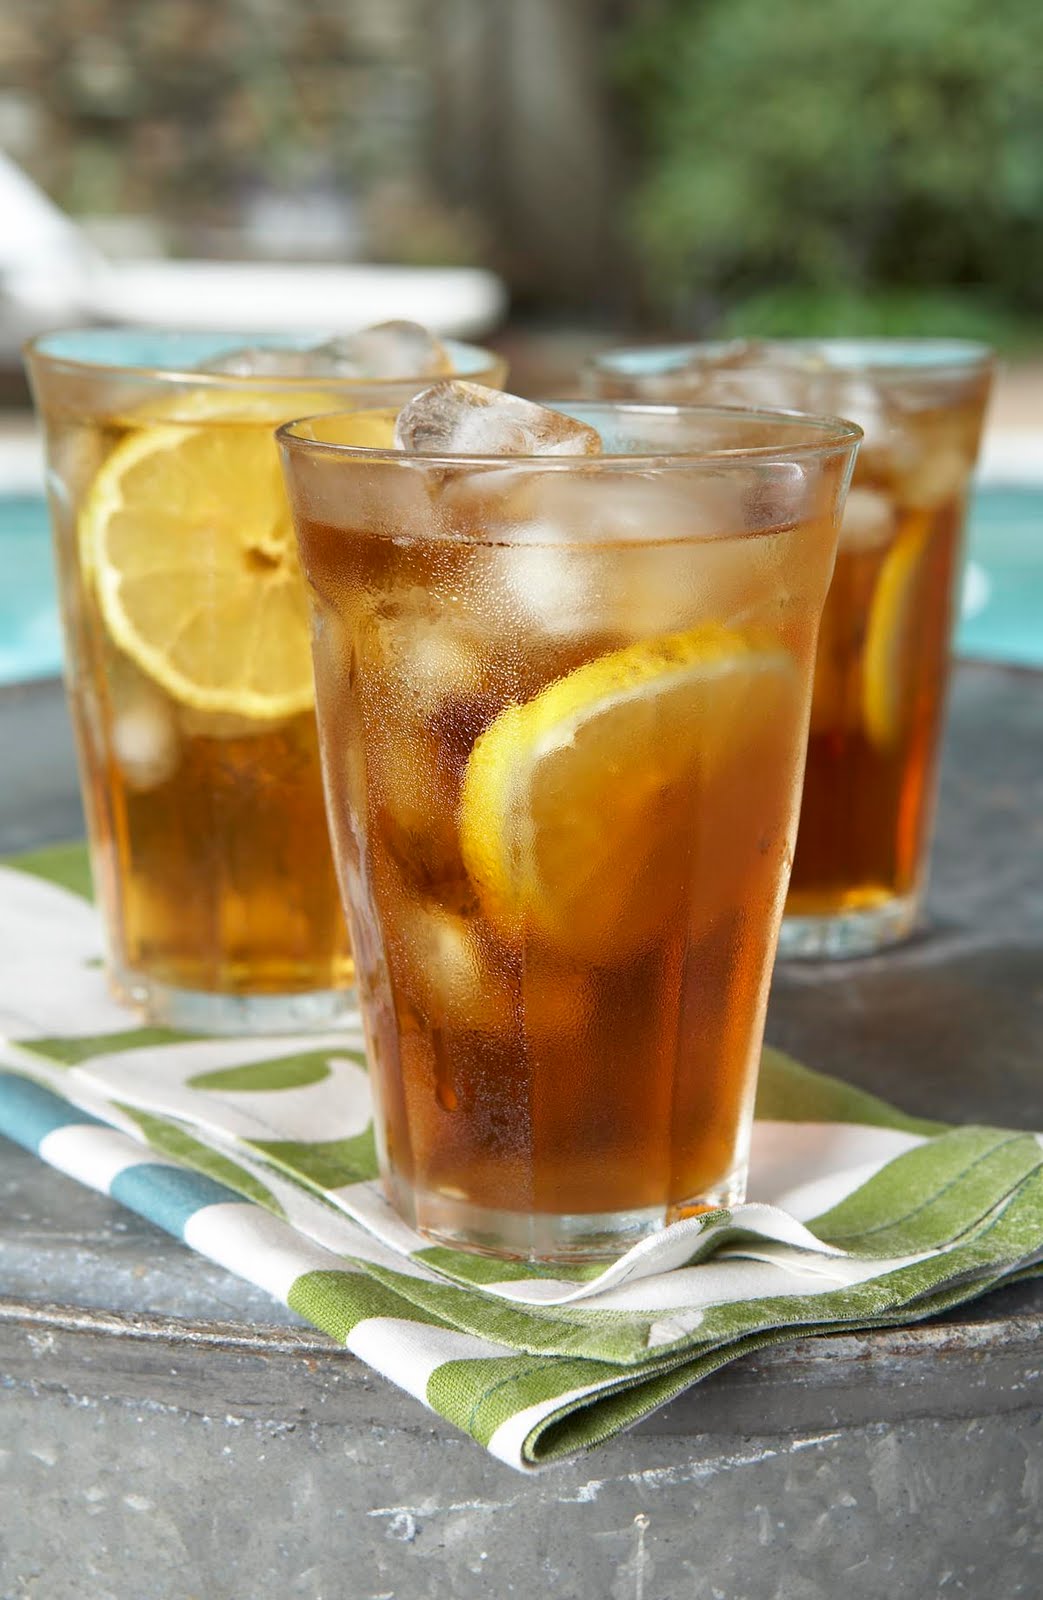 LisaKnowsTea: Celebrating Summer with Iced Tea